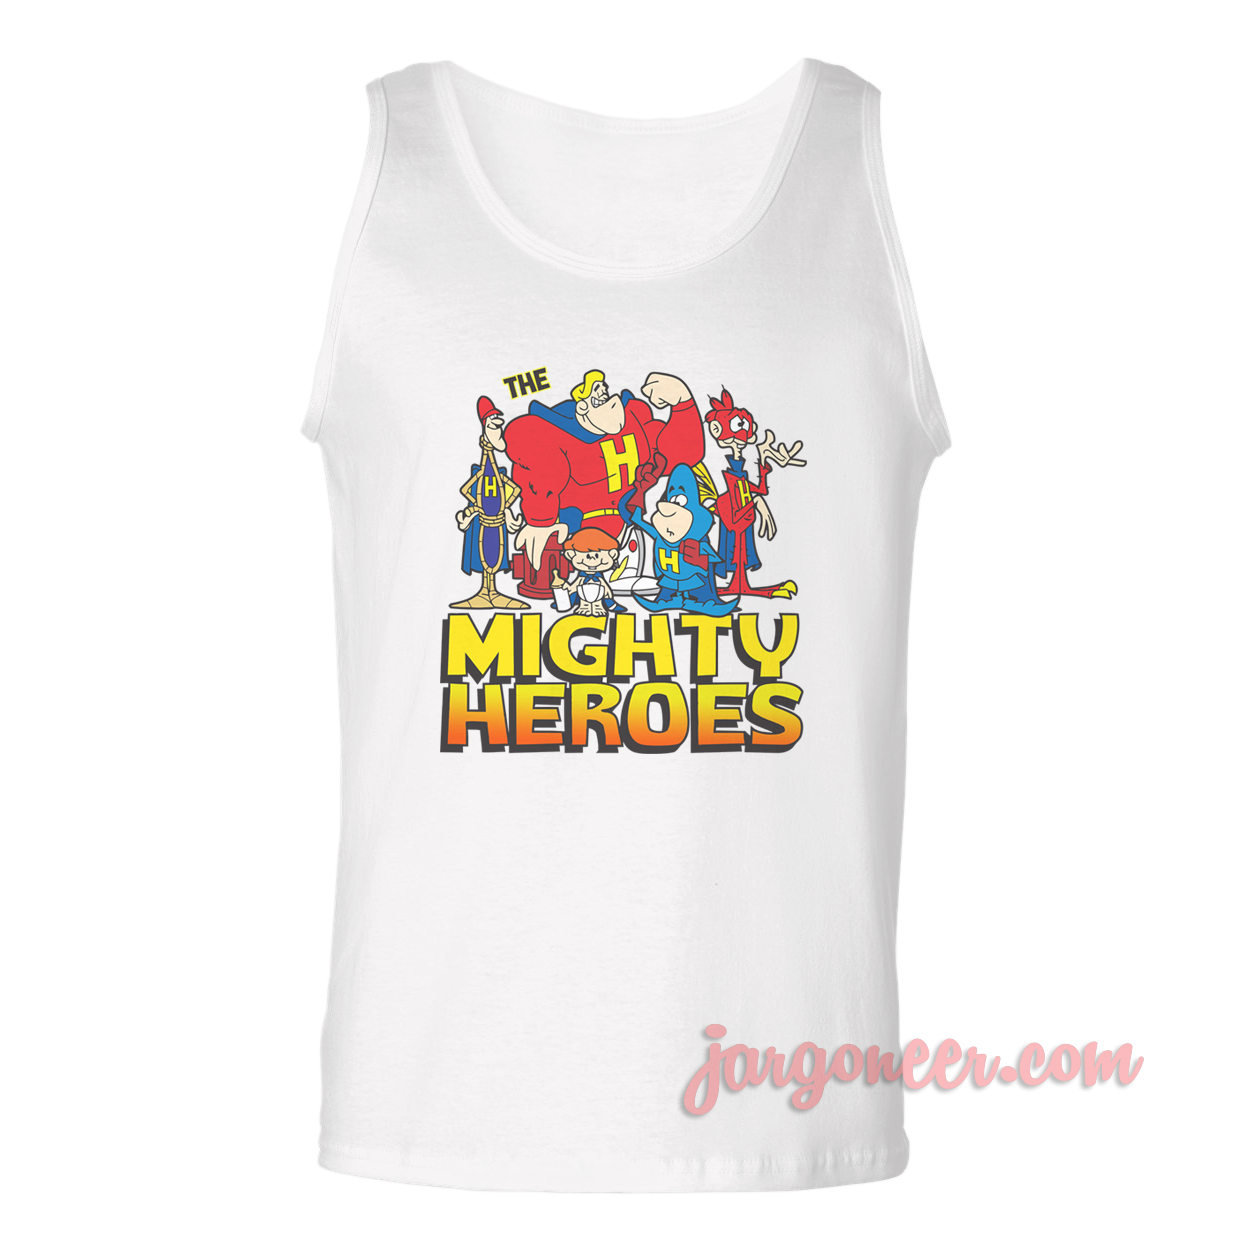 mighty heroes tanktop white - Shop Unique Graphic Cool Shirt Designs